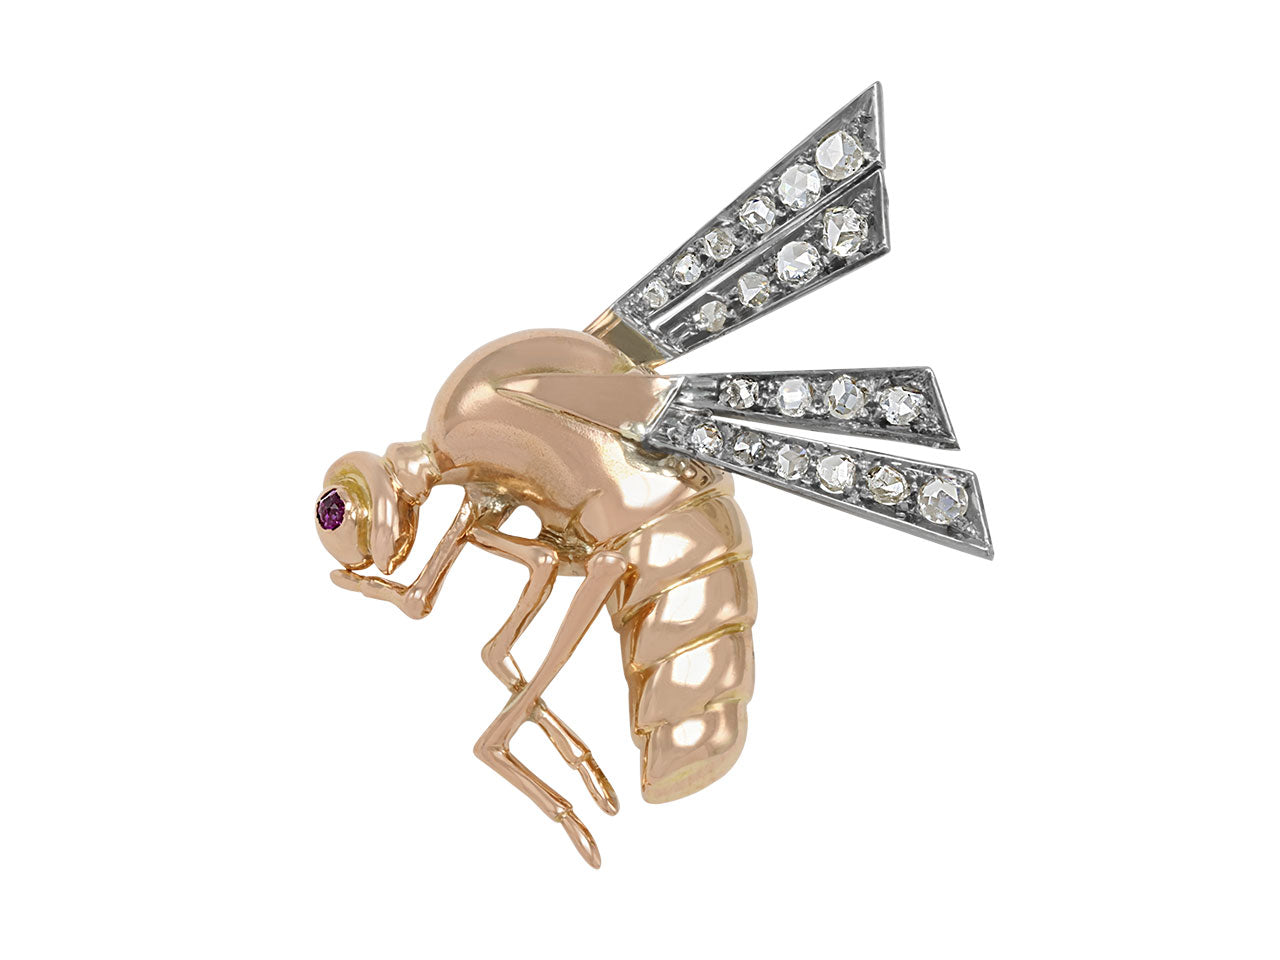 Retro Bee Brooch with Diamond Wings and Tourmaline Eye in 18K Gold